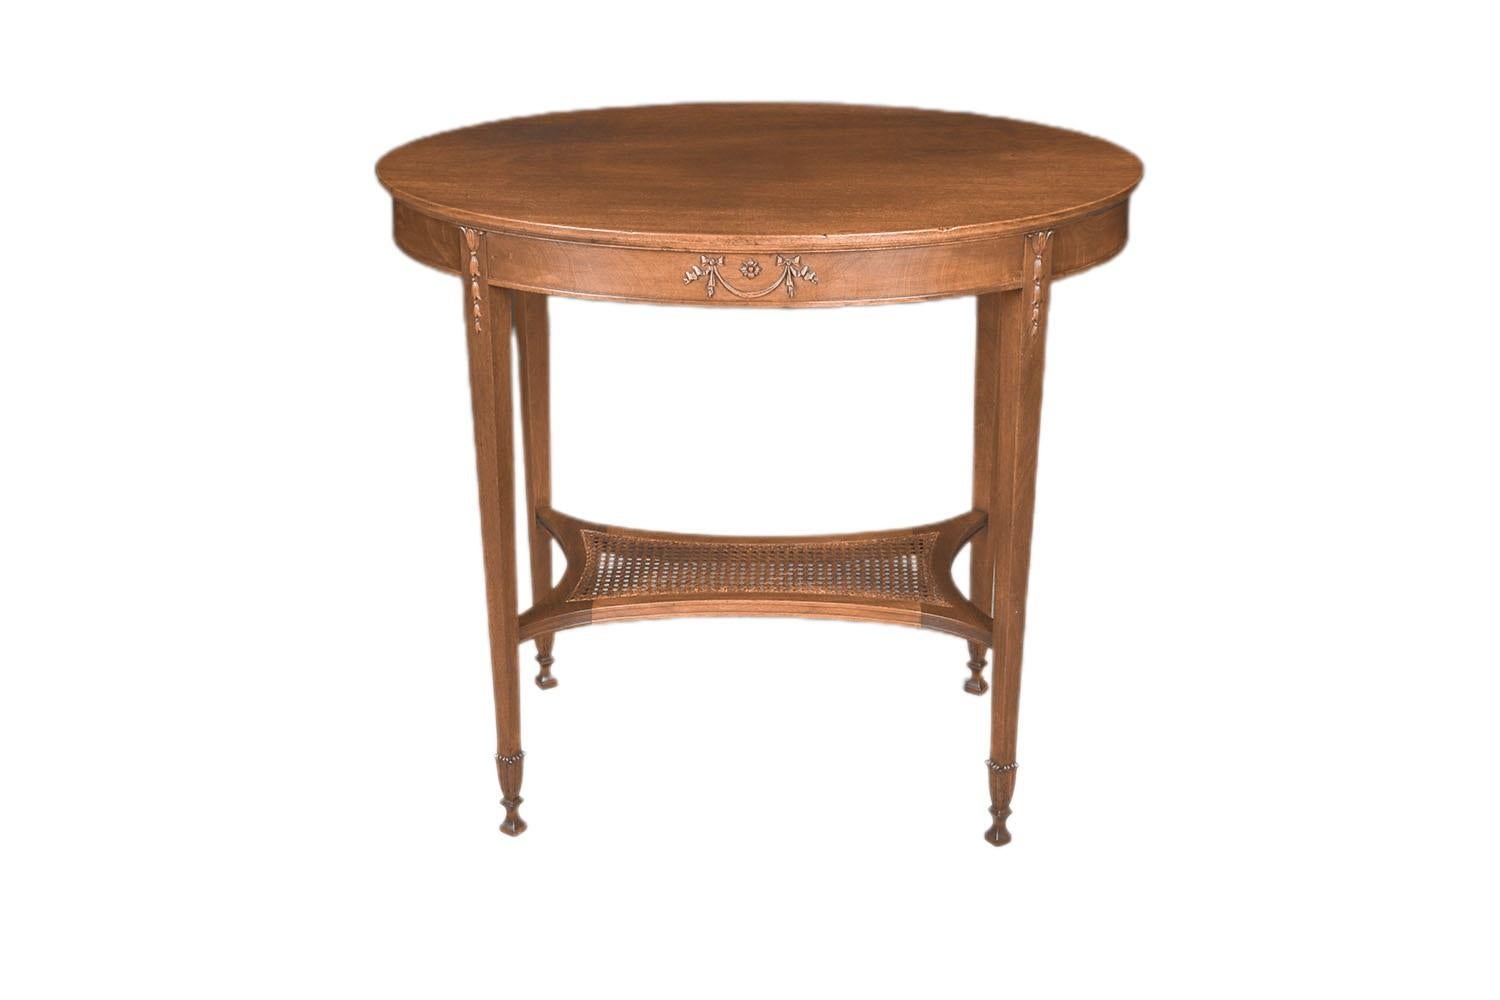 Early 20th century George Hepplewhite style oval carved mahogany two tiered accent or occasional table with caned shelf, circa 1930s. It is finished and carved on all sides so it can be placed in the center of a room or against a wall. It has a